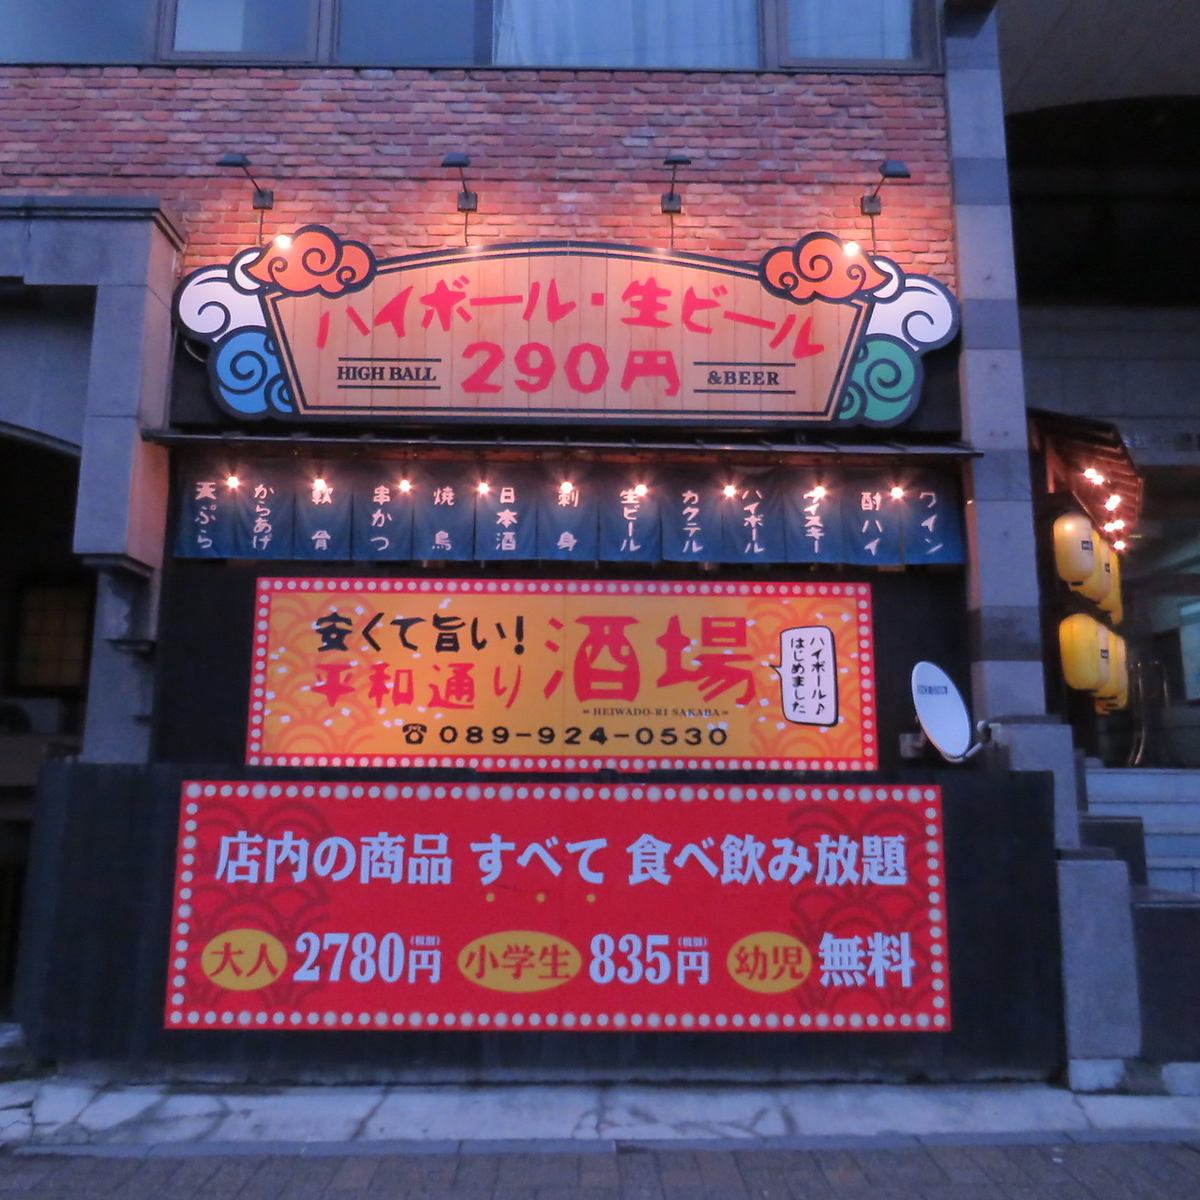 Heiwa Dori Bar!Students are also welcome!All-you-can-eat and drink courses are also available!